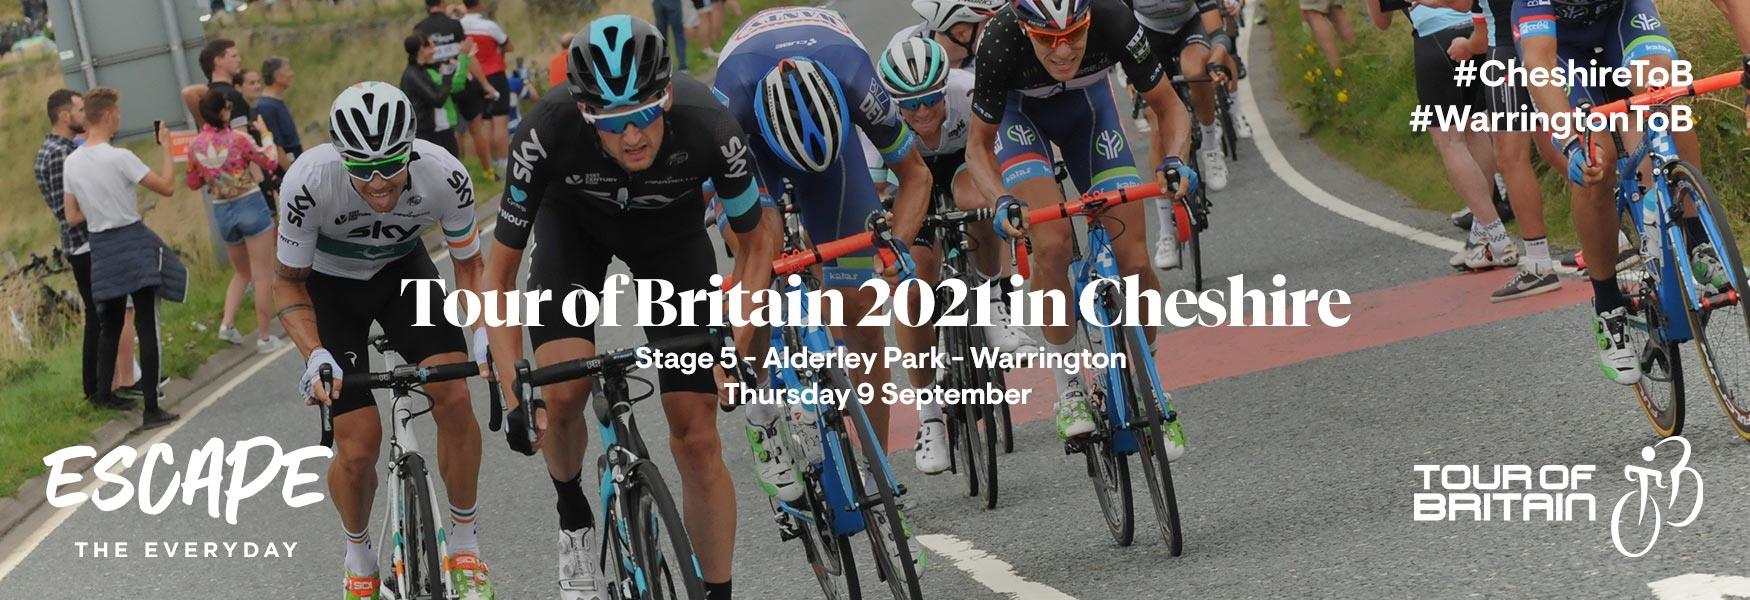 Tour of Britain 2021 in Cheshire